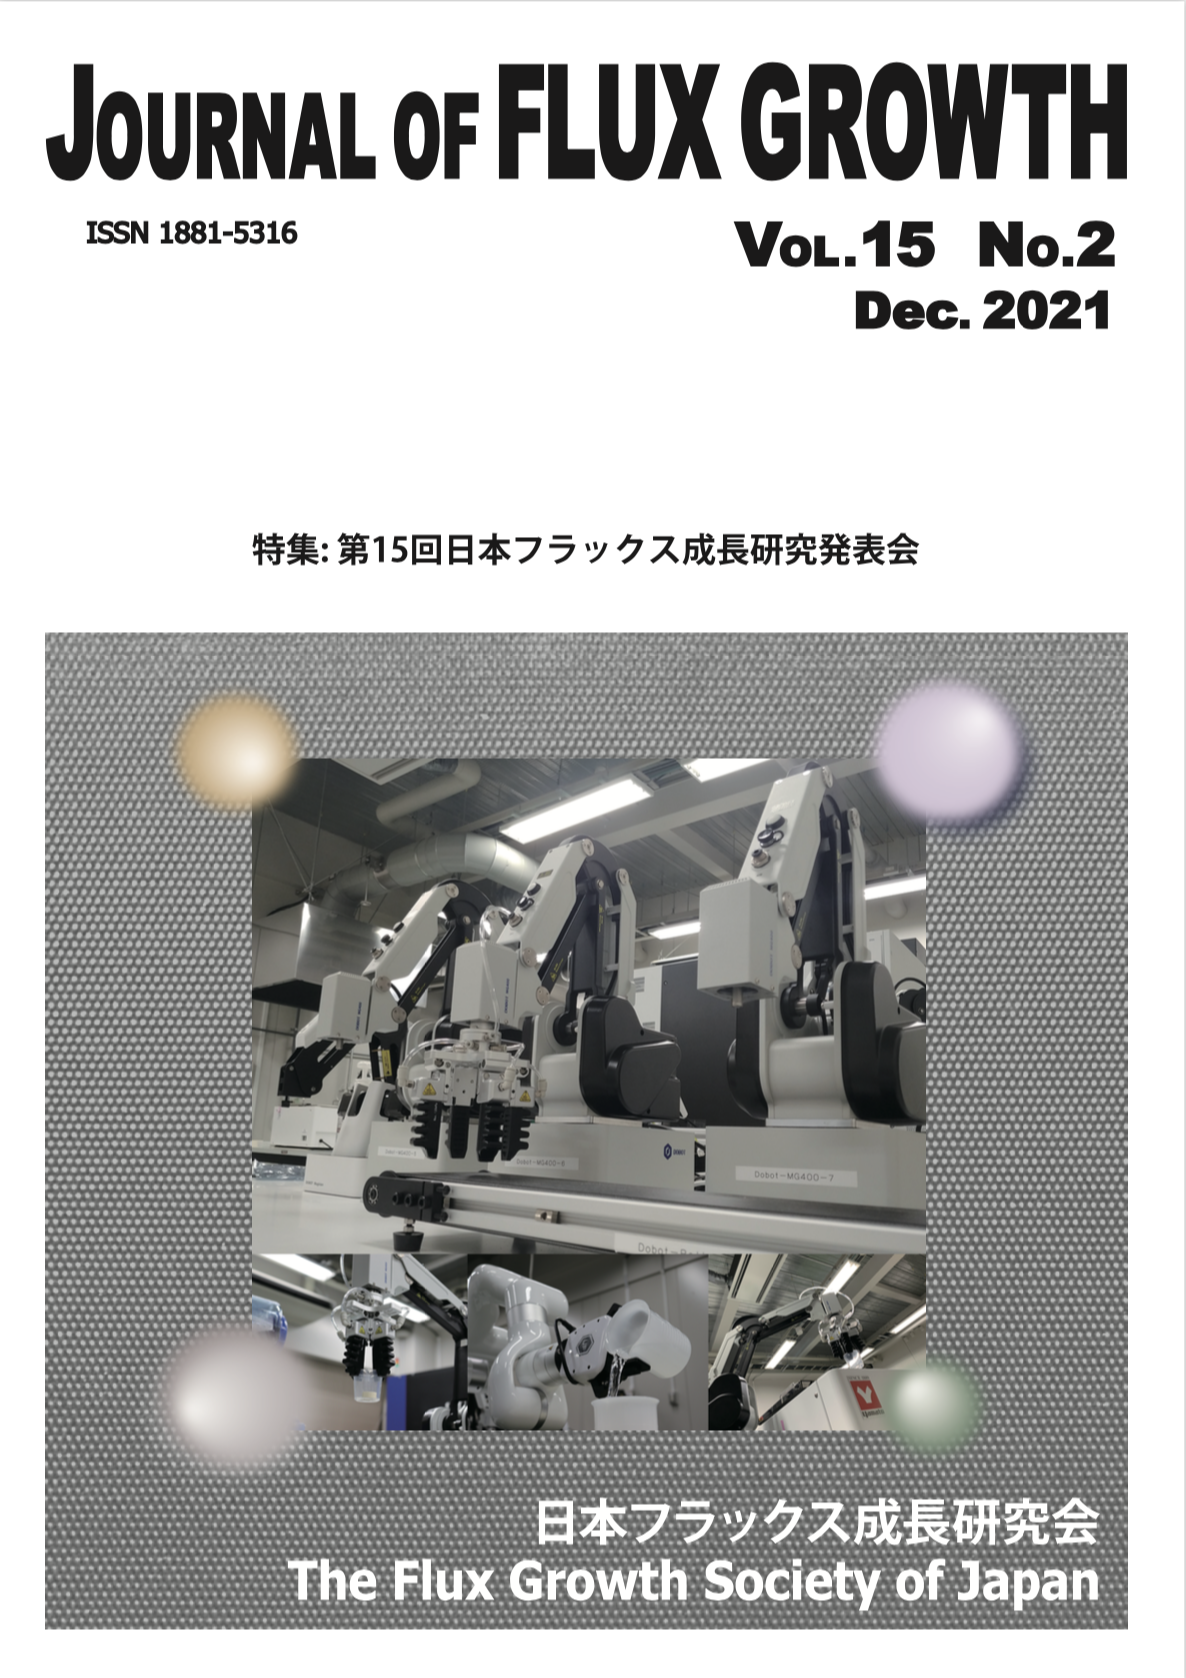 JOURNAL OF FLUX GROWTH Vol.15 No.2